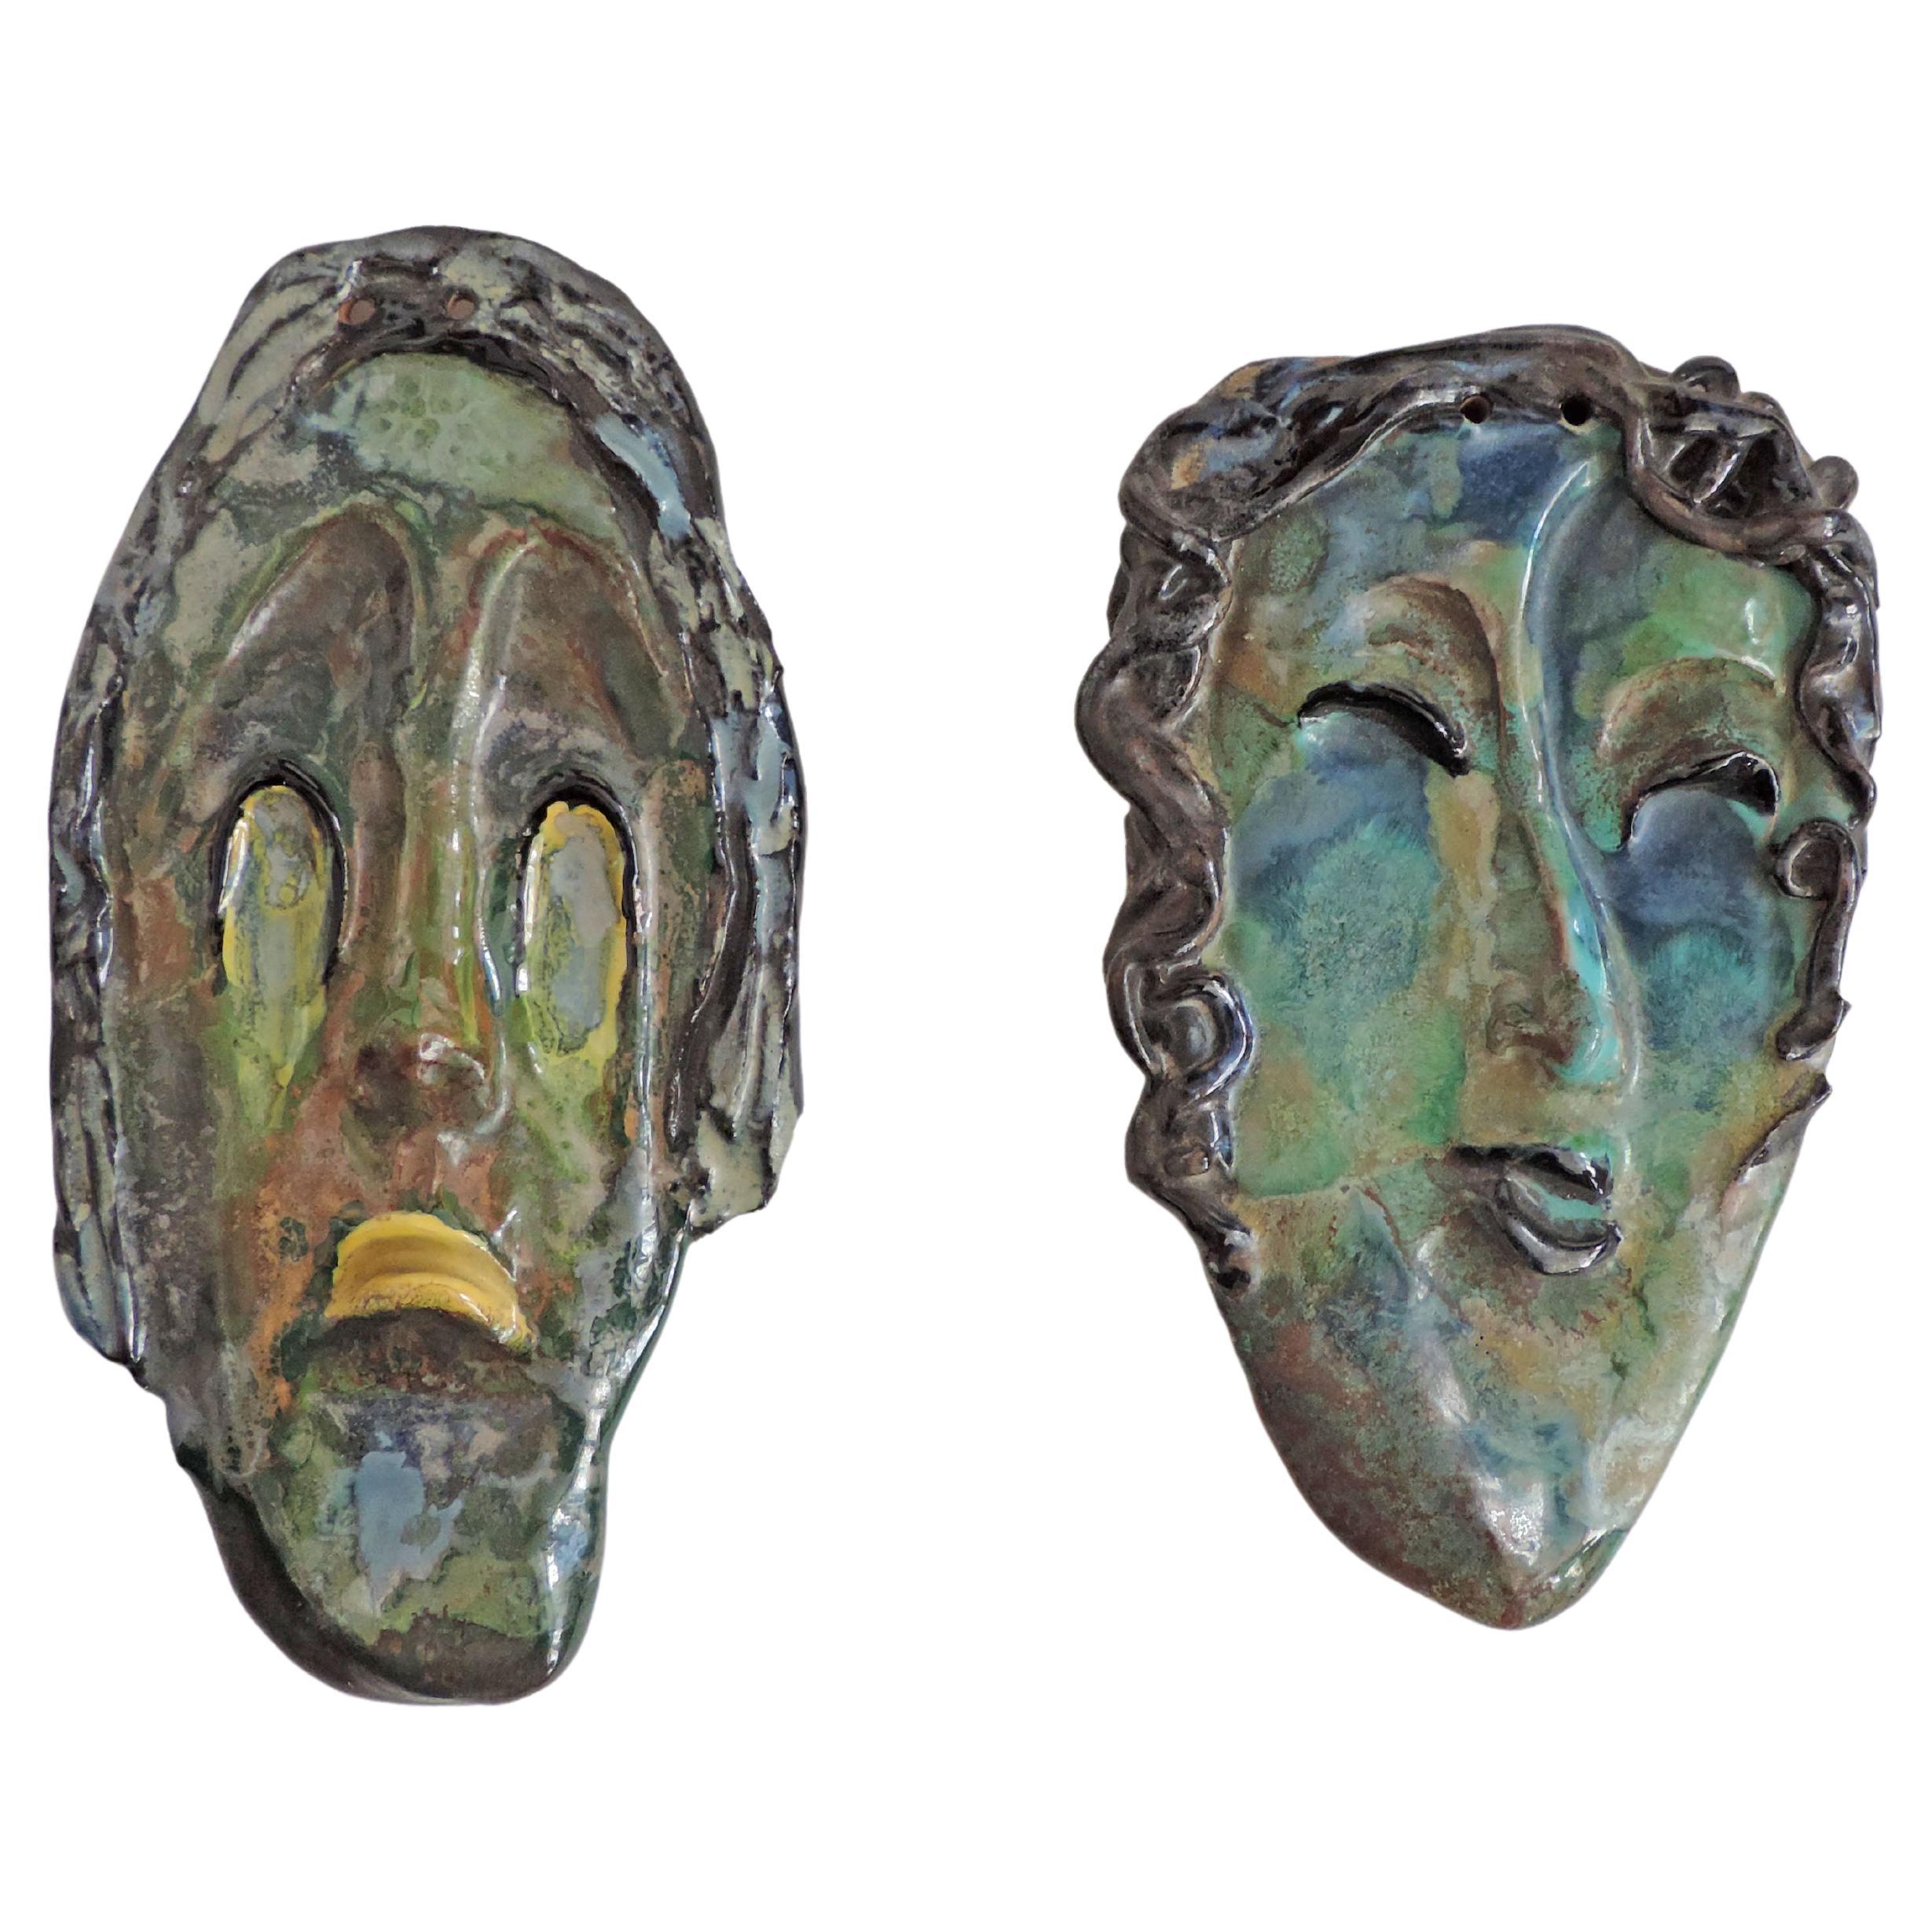 Ivanhoè Gambini Pair of Futurist Wall Masks, Italy, 1940s For Sale